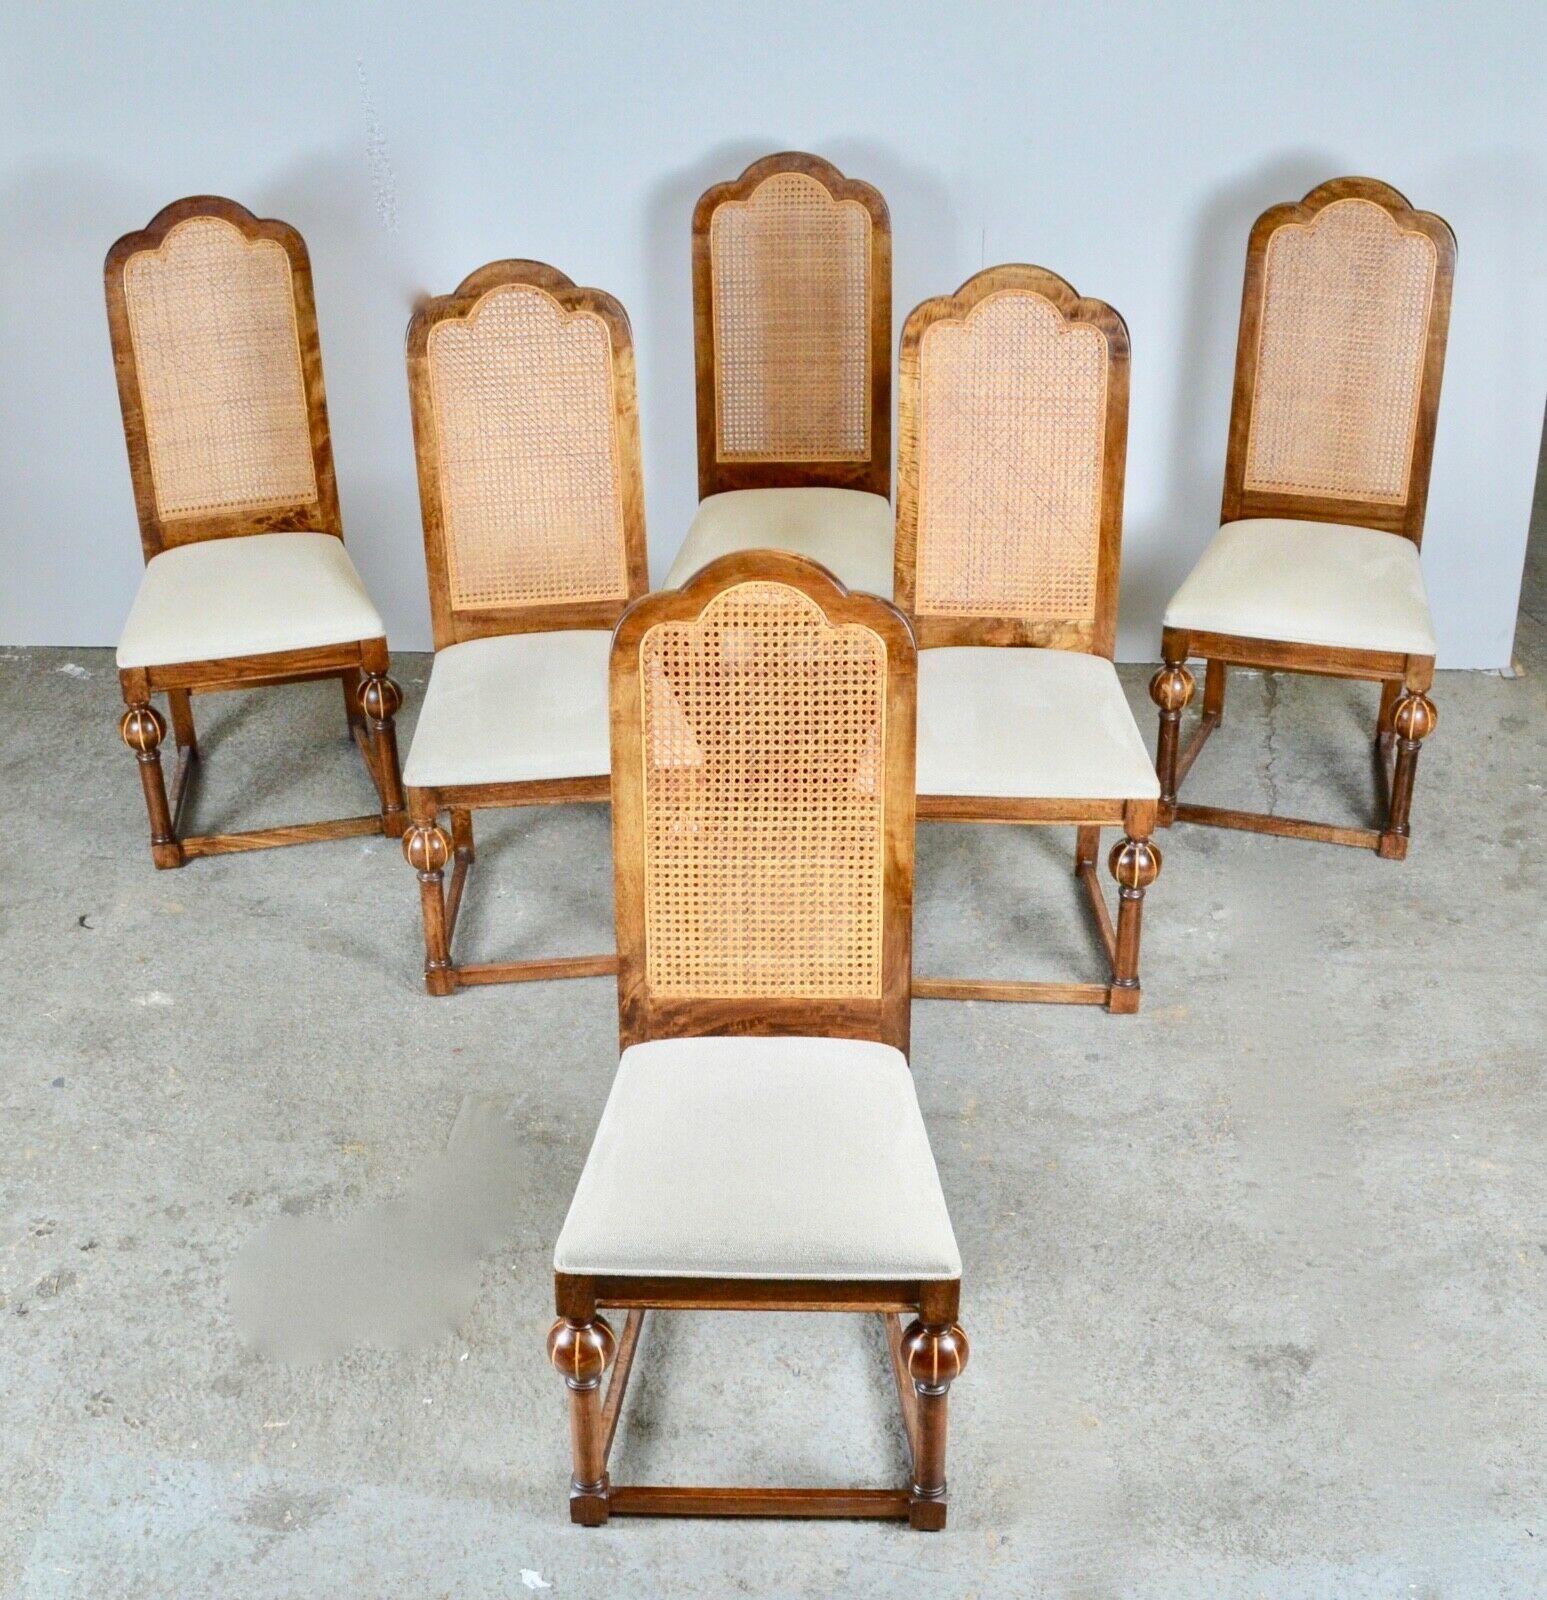 Country Stunning Walnut Parquetry Inlaid Dining Table and Set of 6 Chairs, Bulbous Legs For Sale